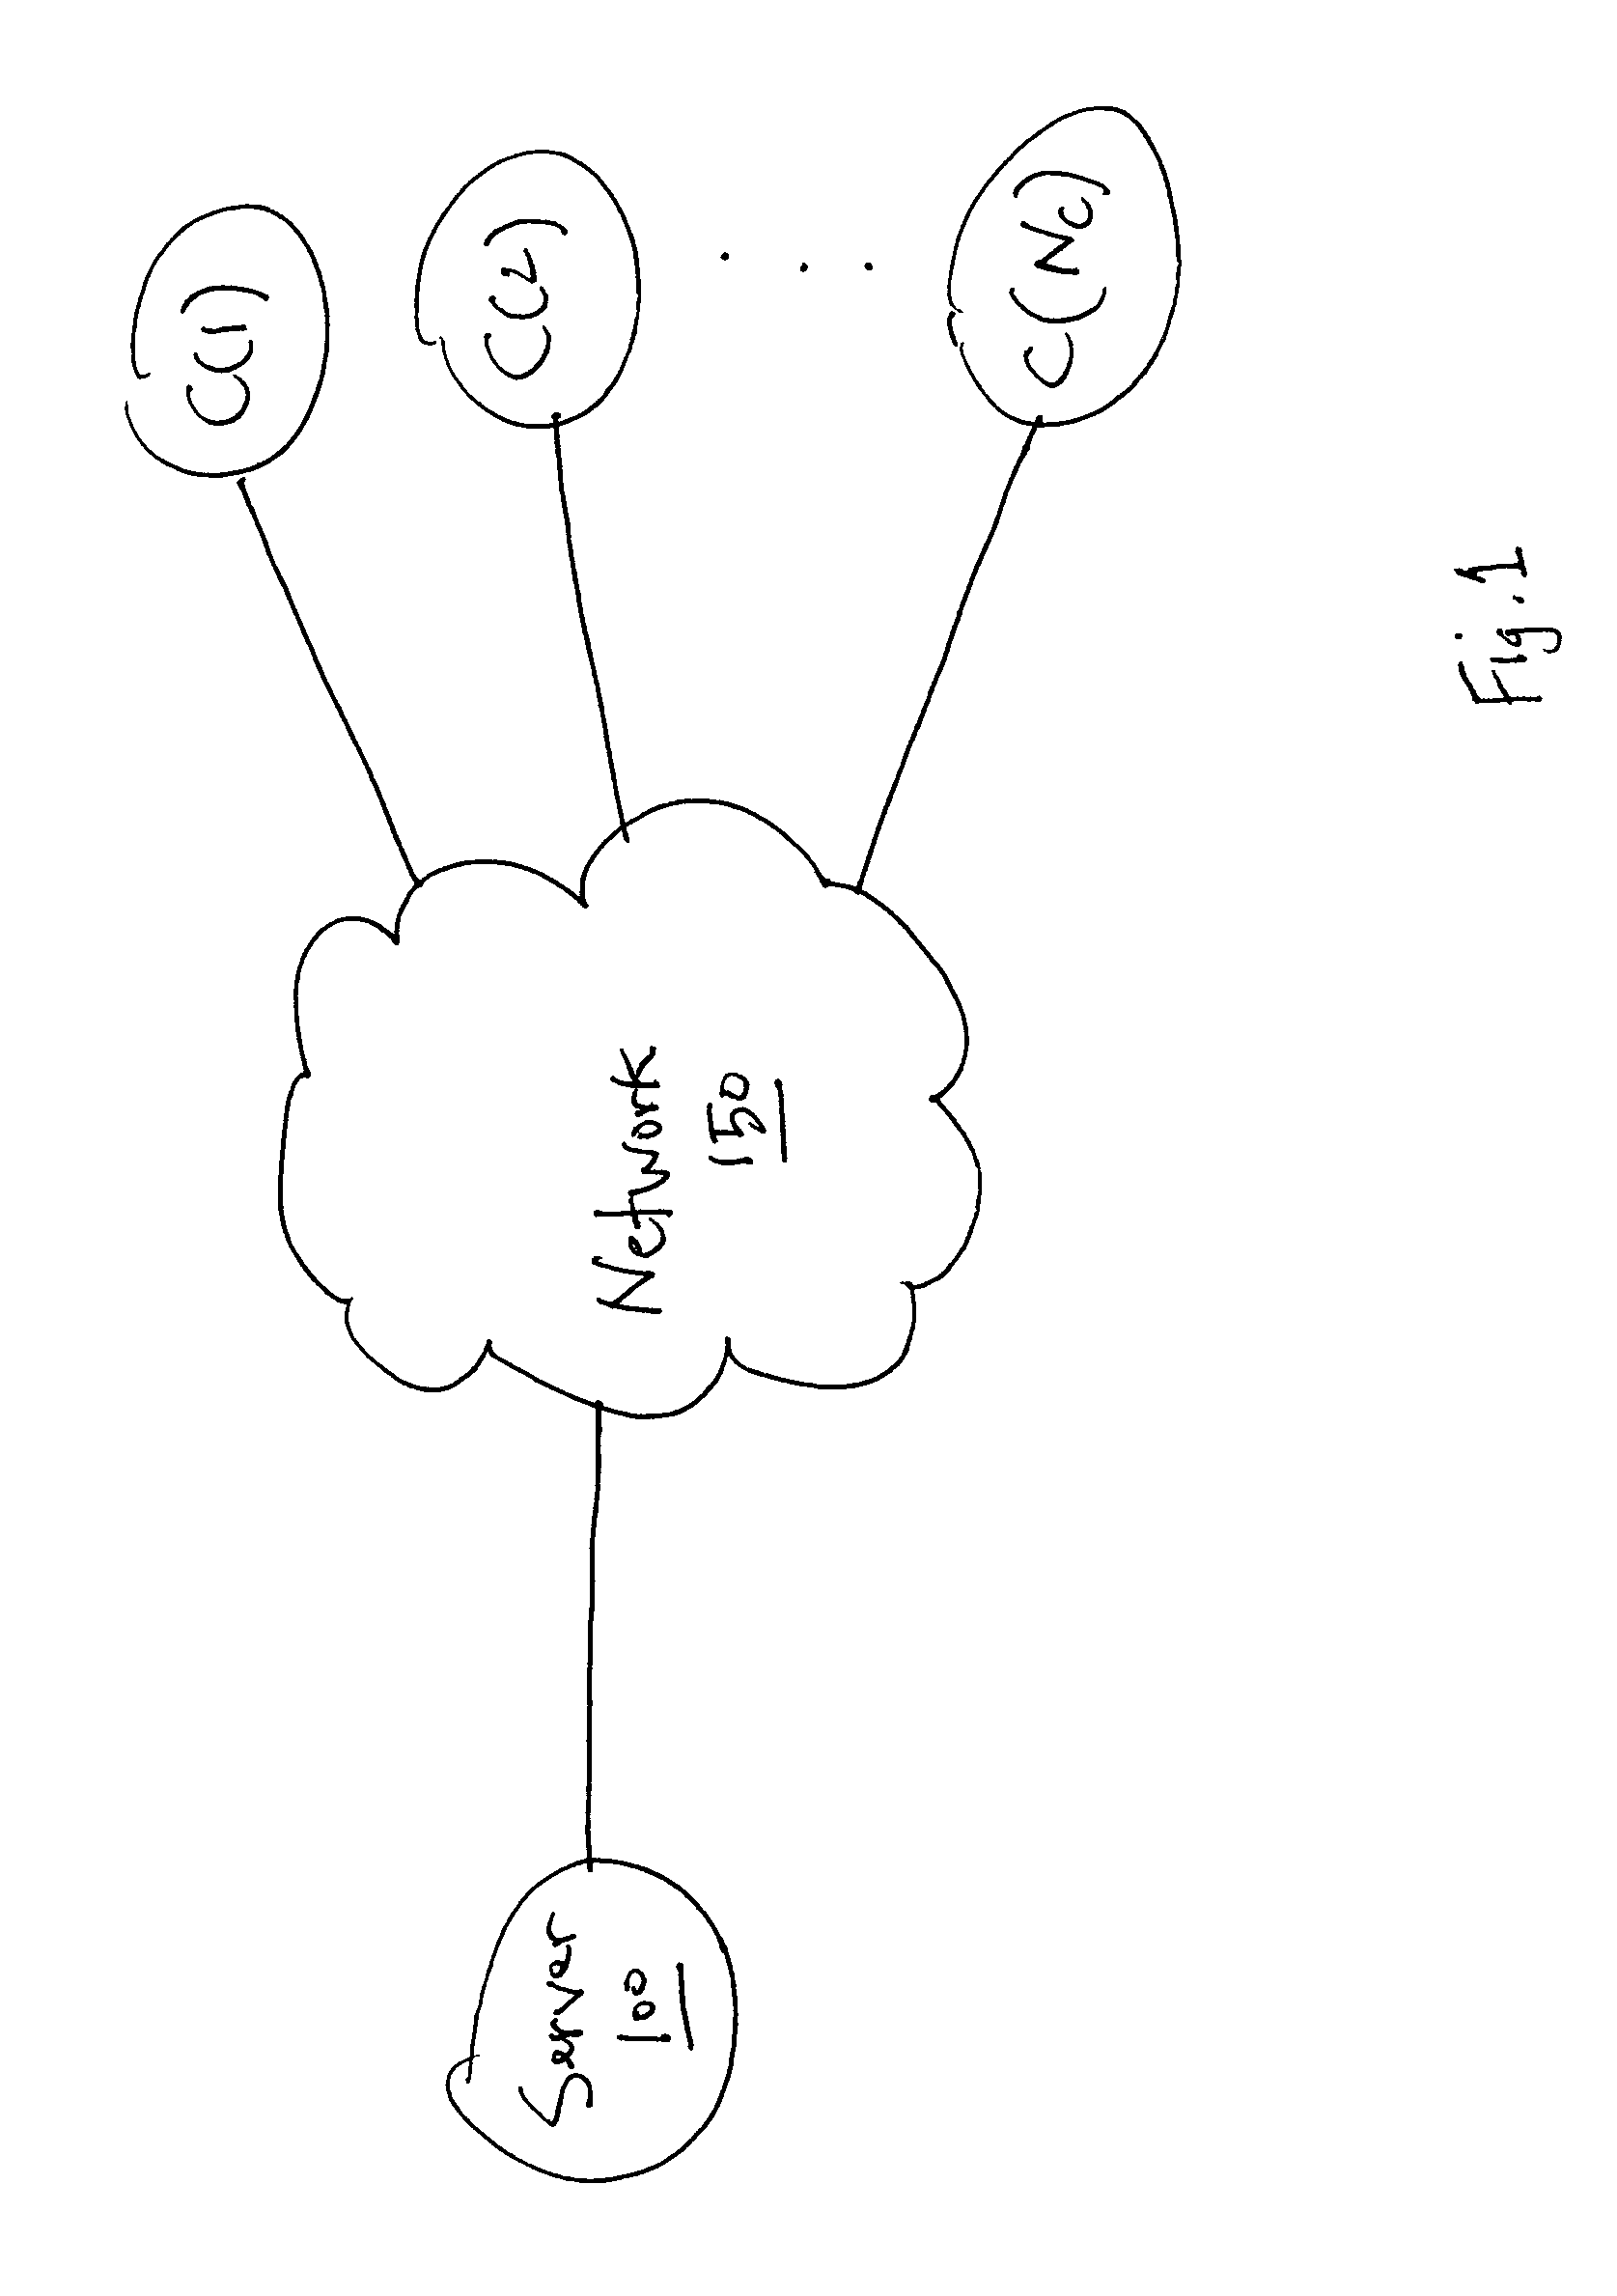 Software system for efficient data transport across a distributed system for interactive viewing